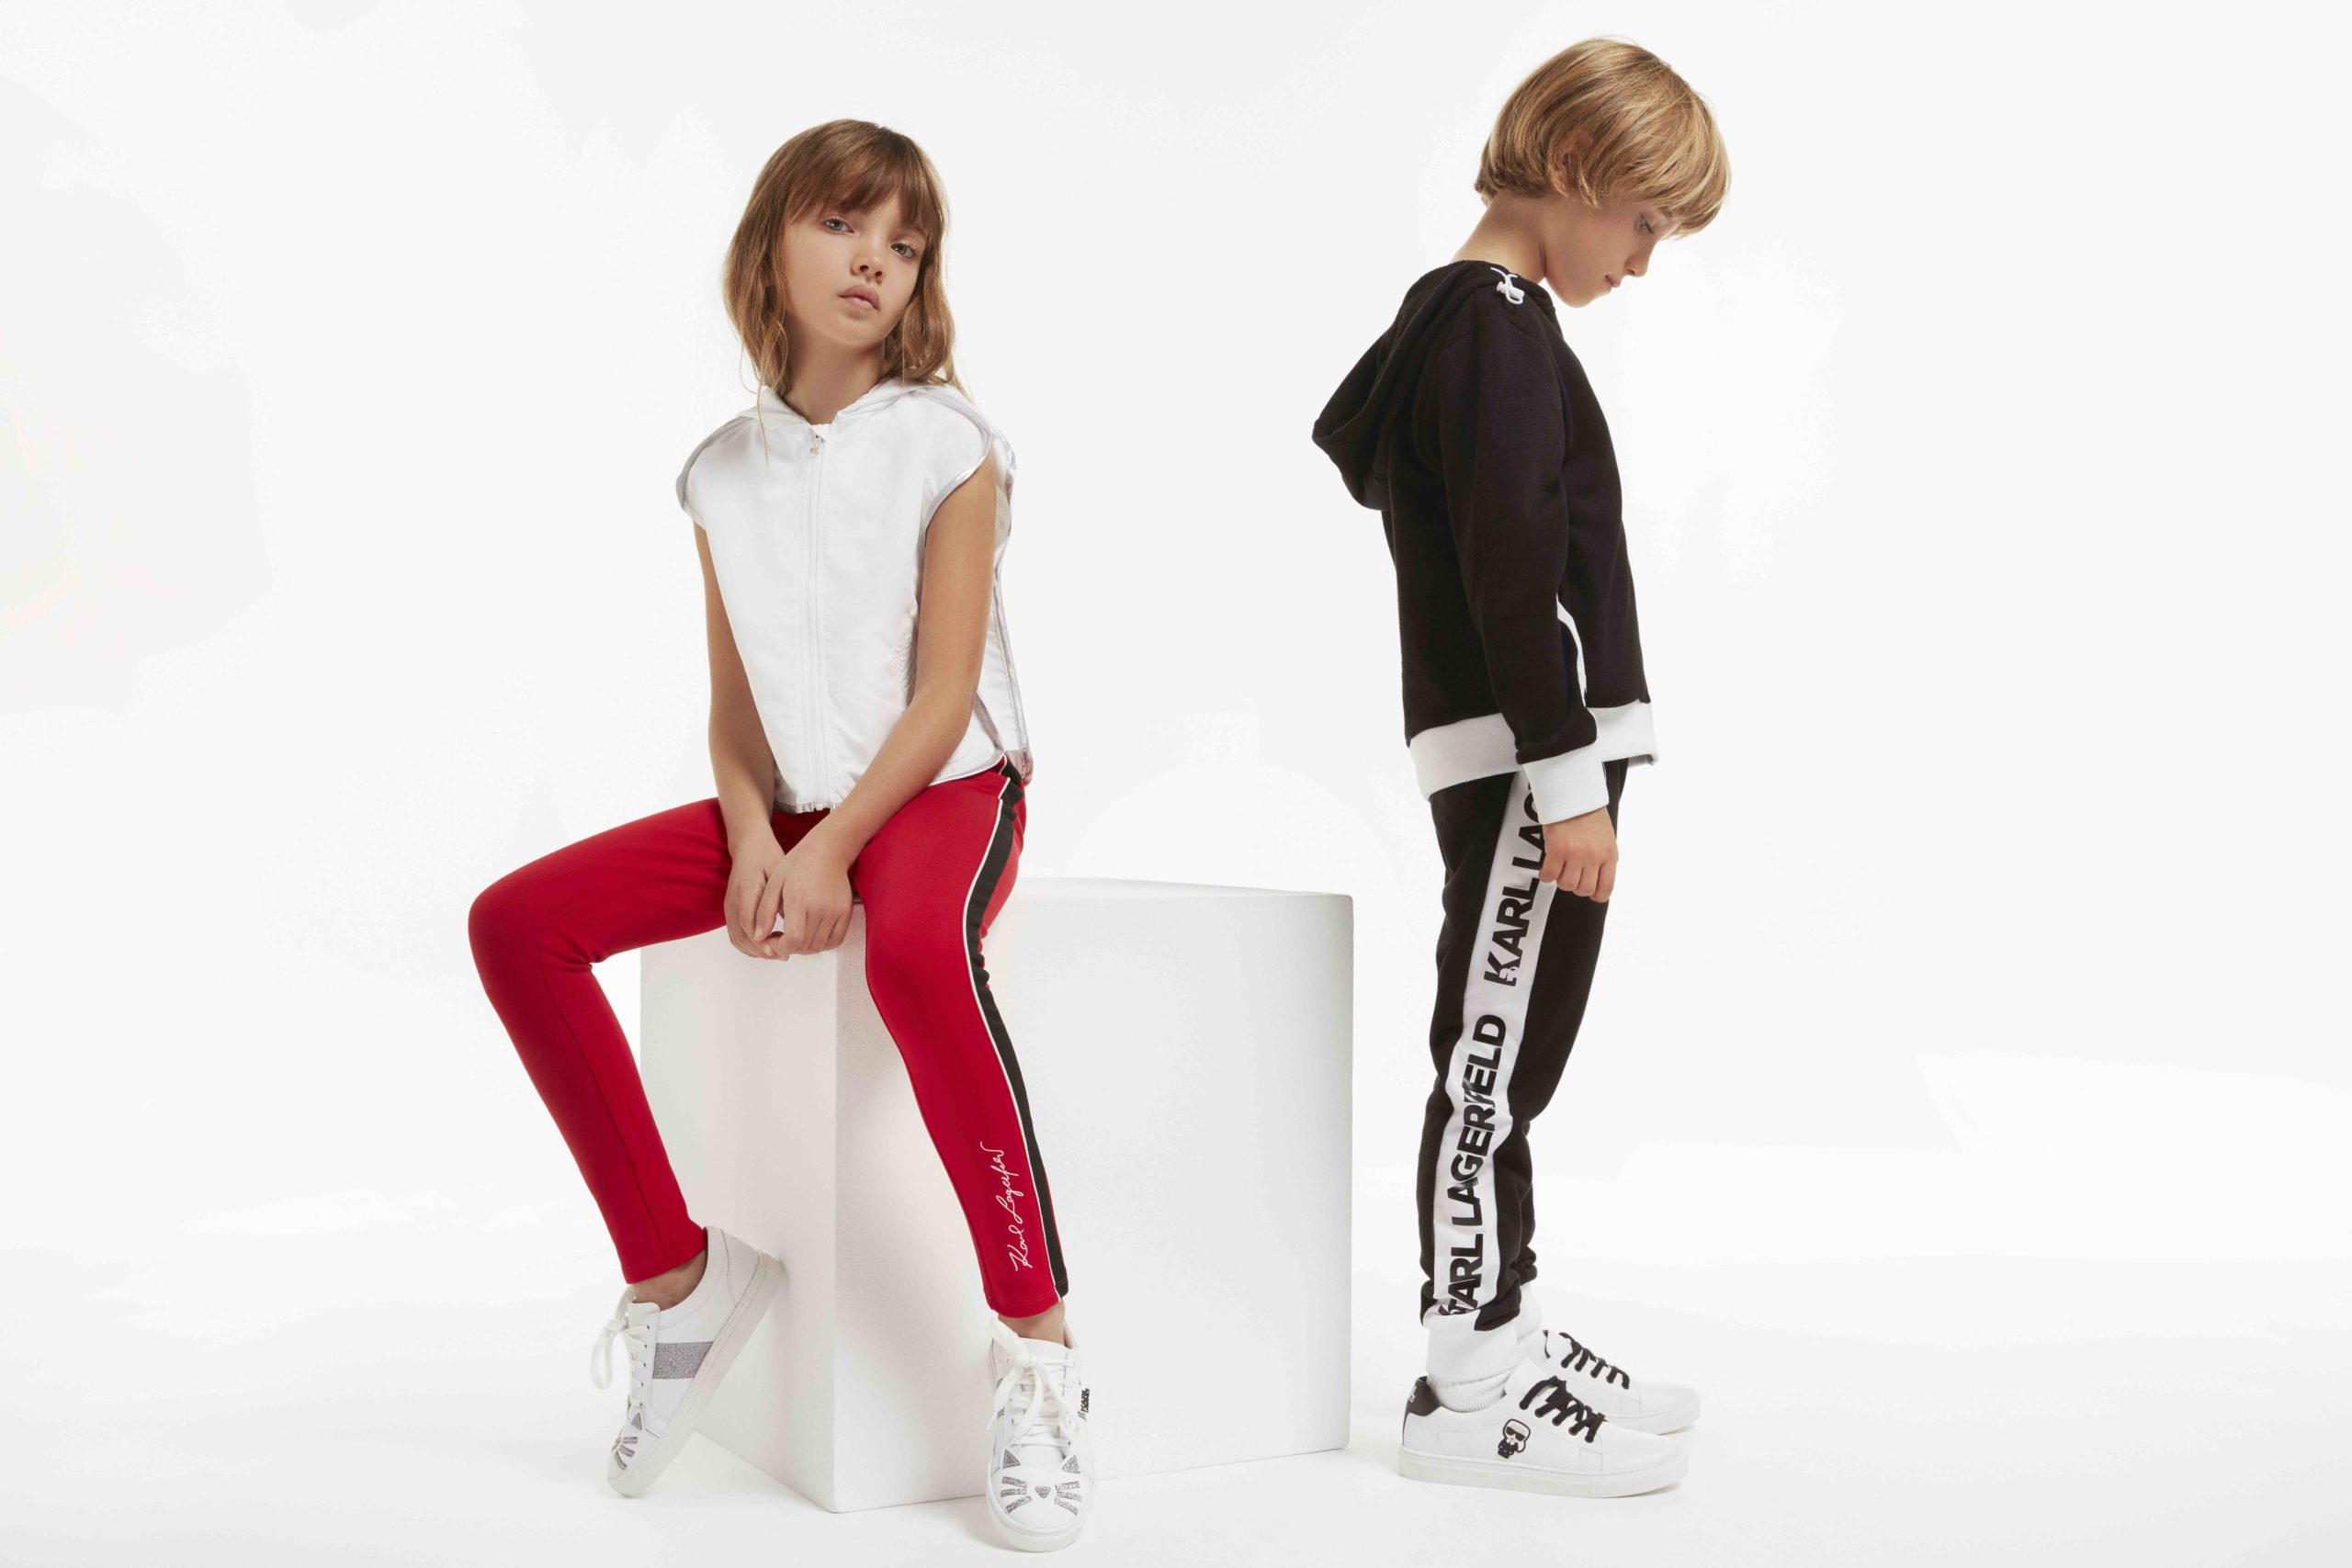 Sporty athleisure styles are at the heart of the Karl Lagerfeld collection